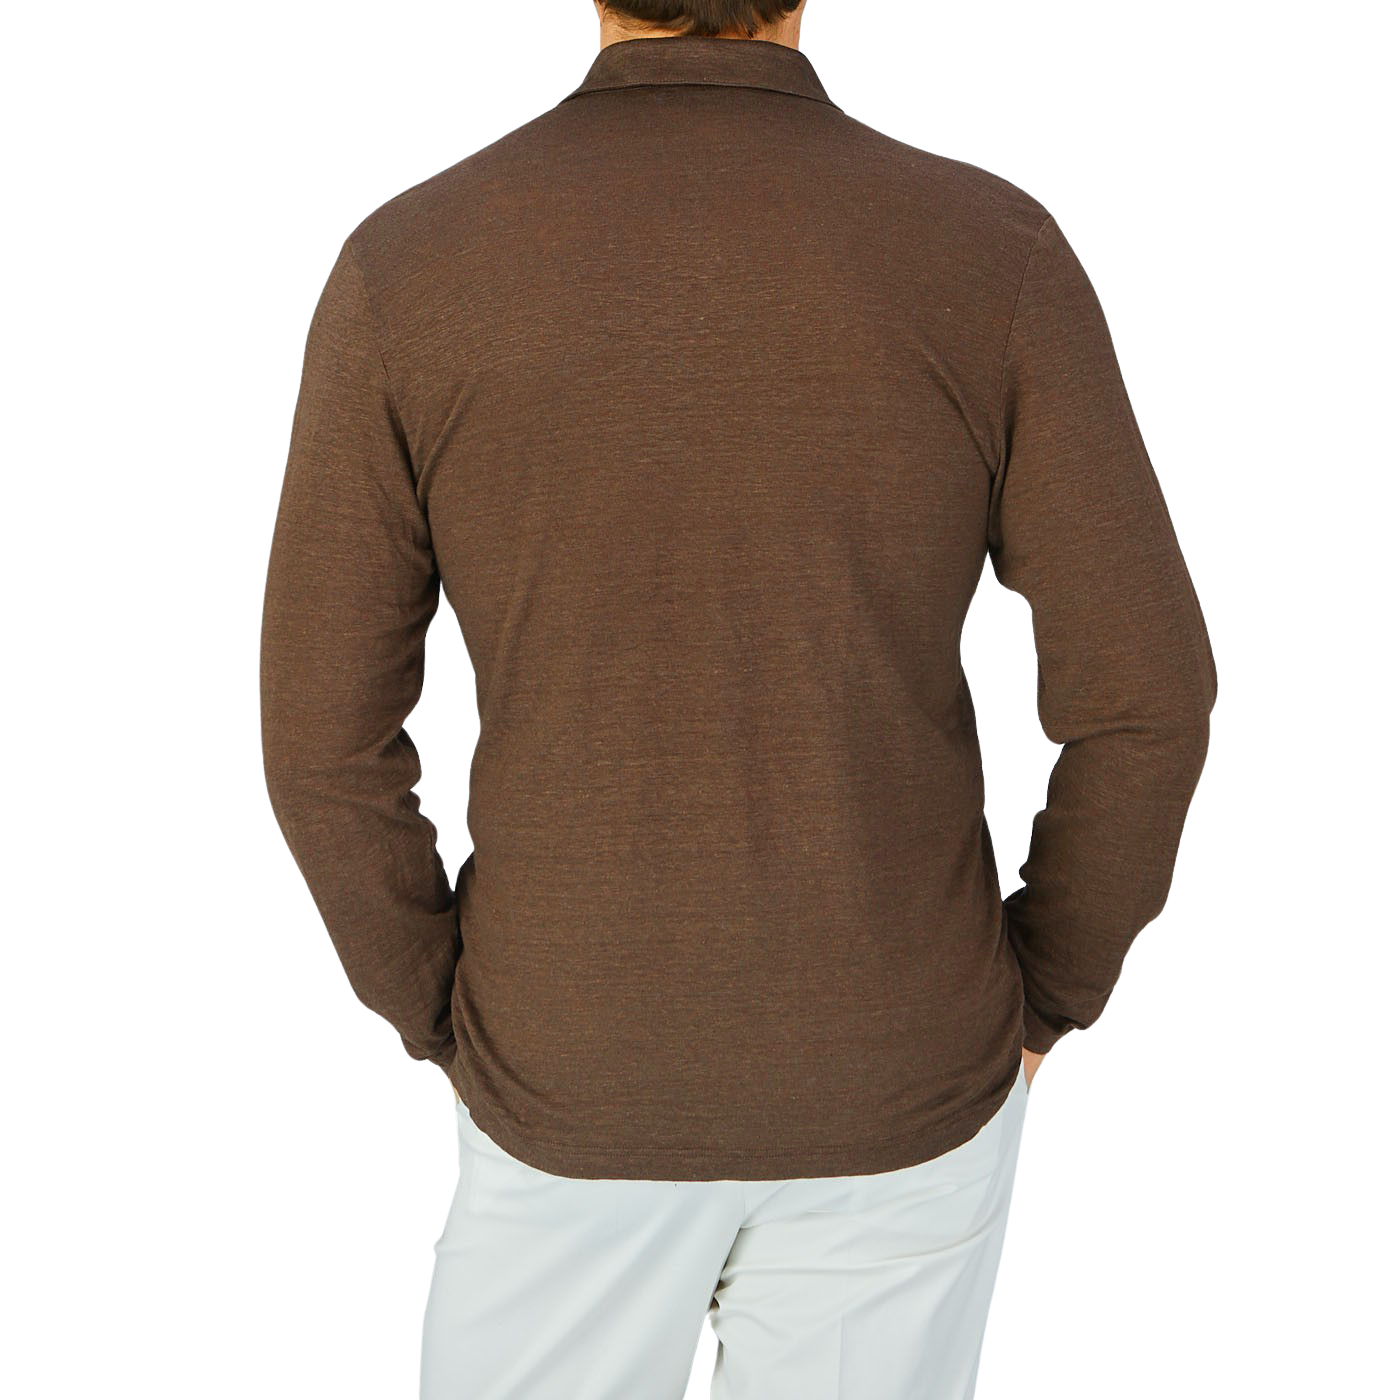 The back view of a man wearing a Gran Sasso Dark Brown Knitted Linen LS Polo Shirt.